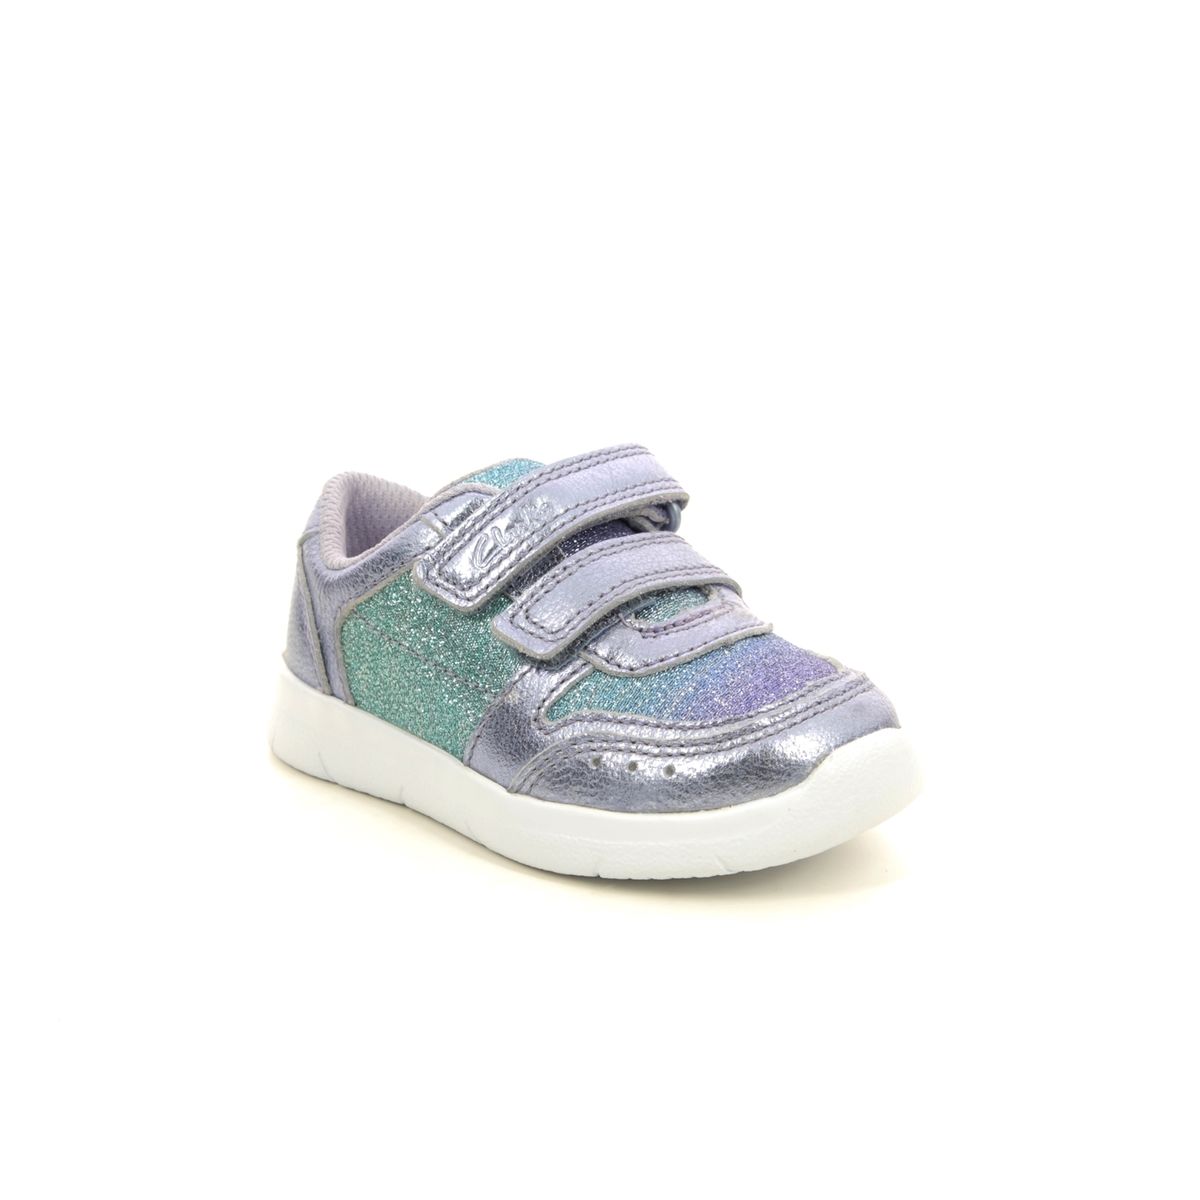 Clarks Ath Sonar T Lilac Kids Toddler Girls Trainers 541217G In Size 7 In Plain Lilac G Width Fitting